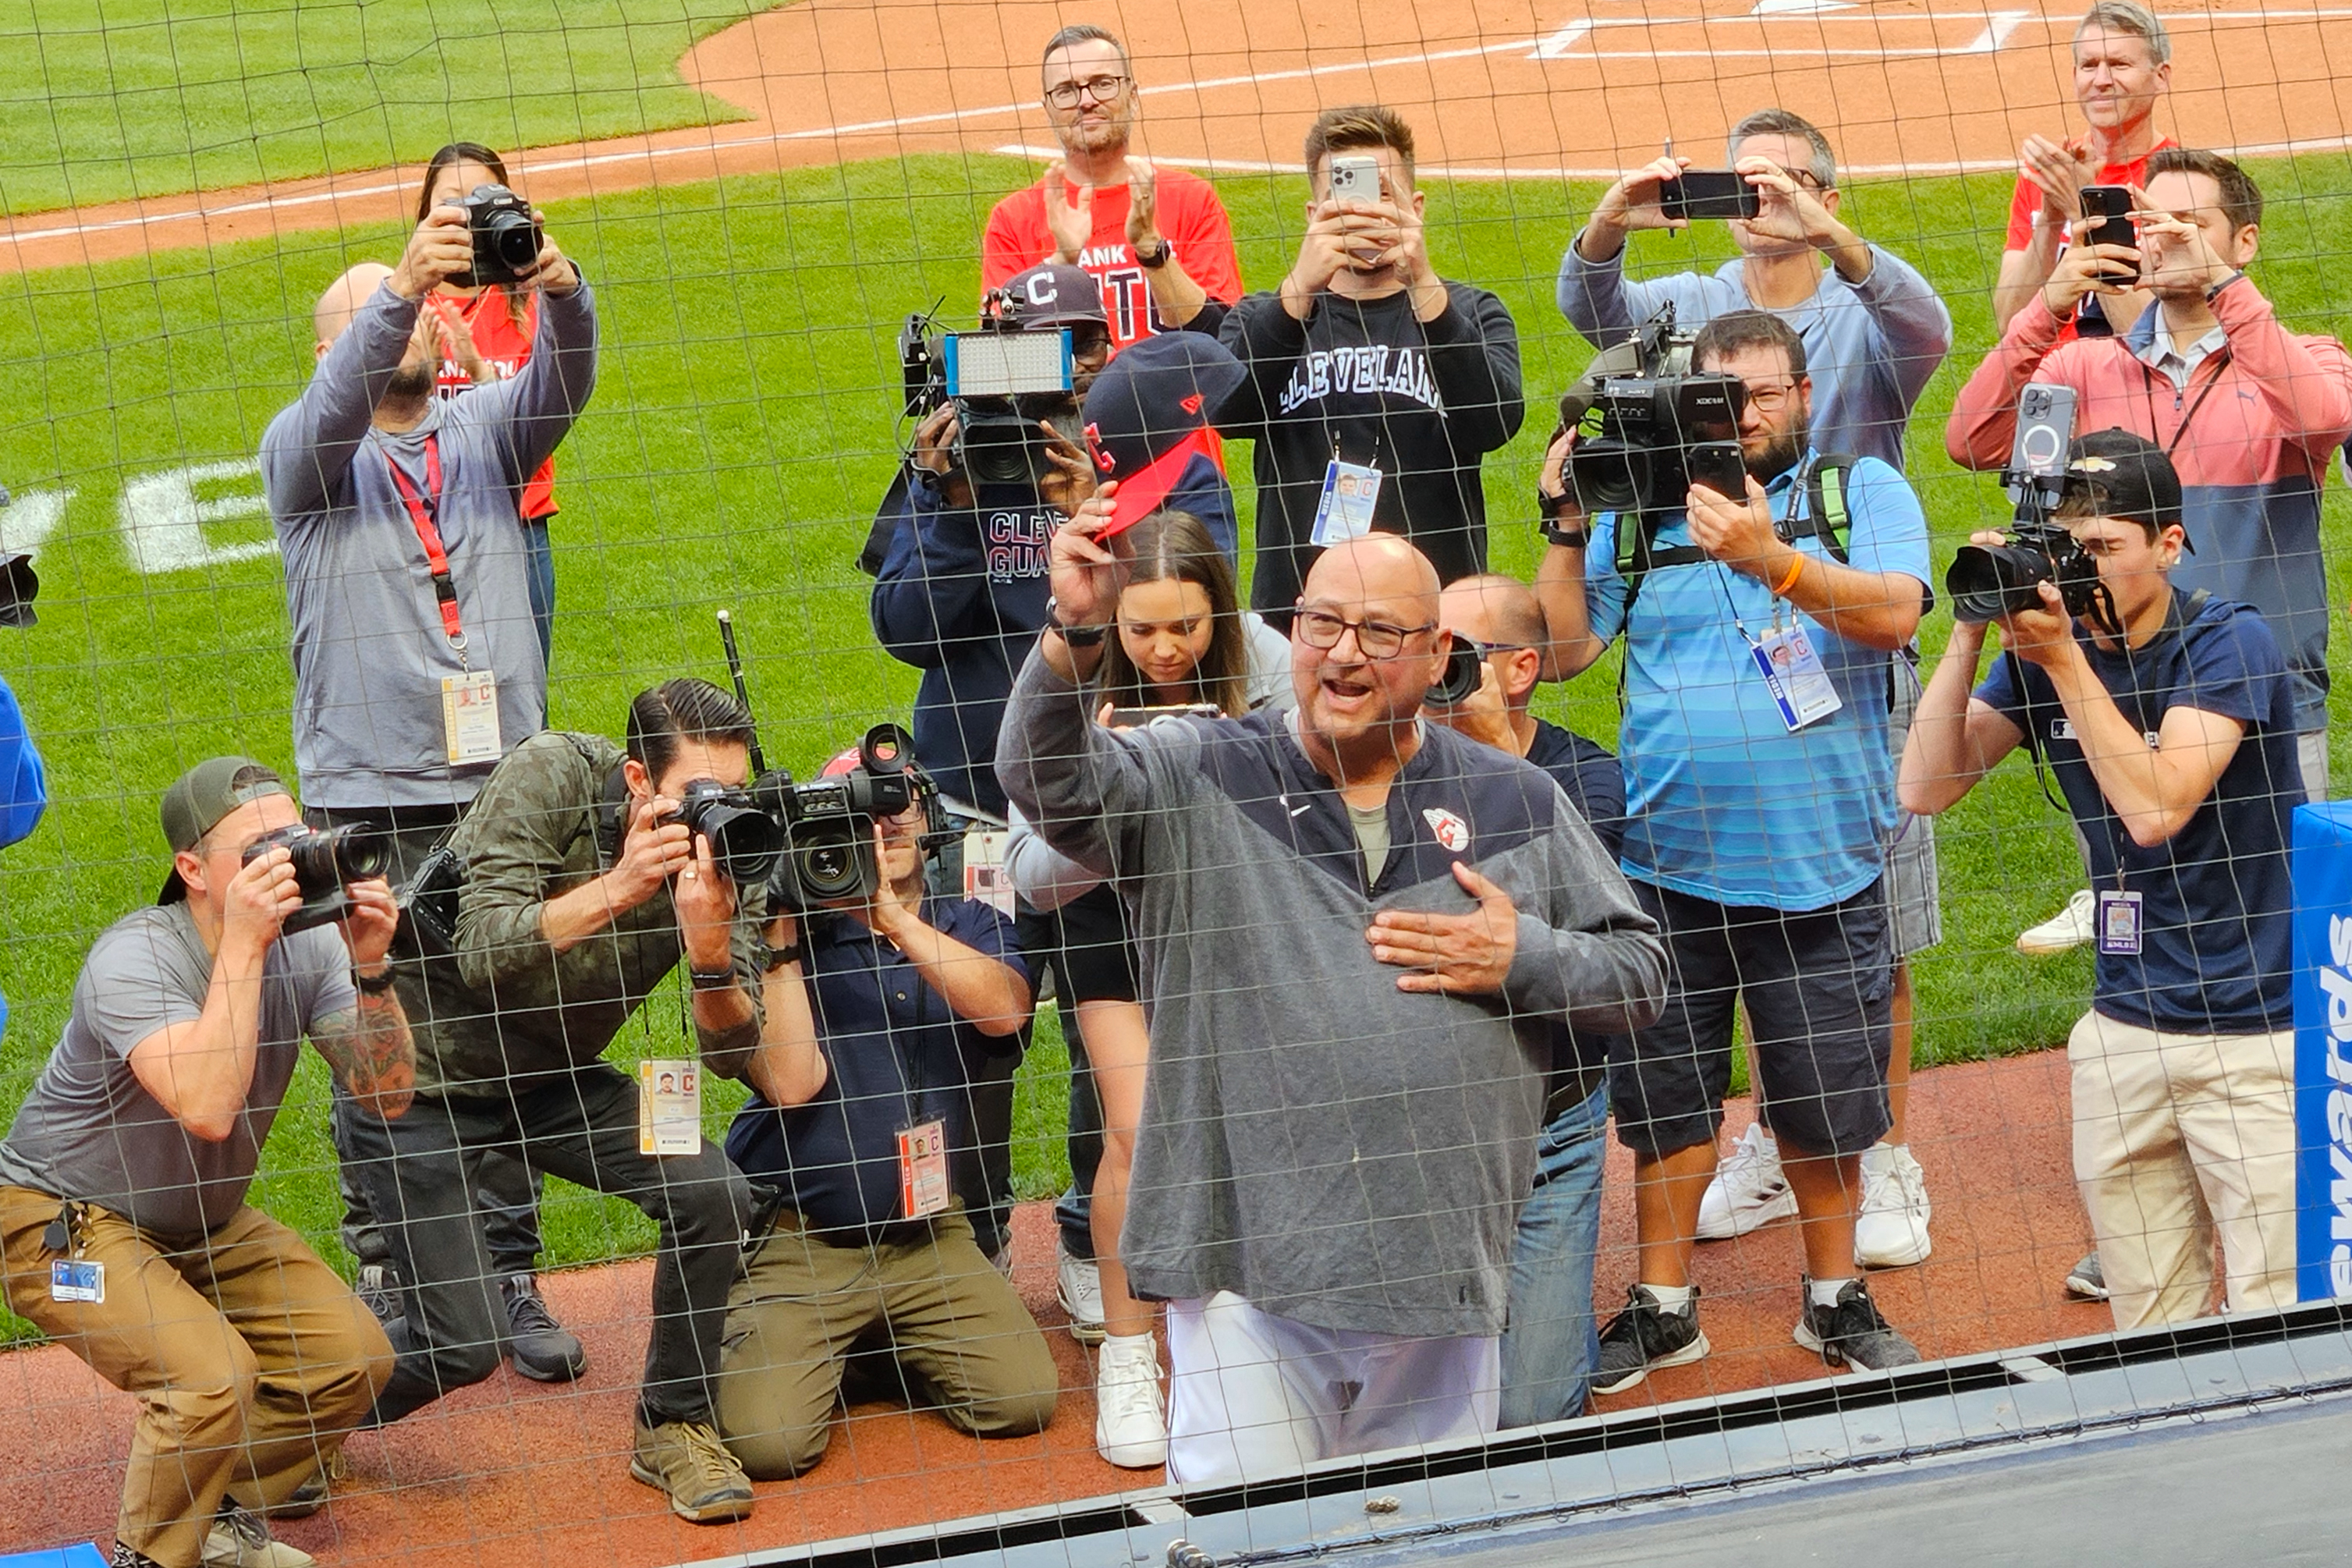 Terry Francona retired from baseball after spending the past 11 seasons as the manager of the Cleveland Guardians.